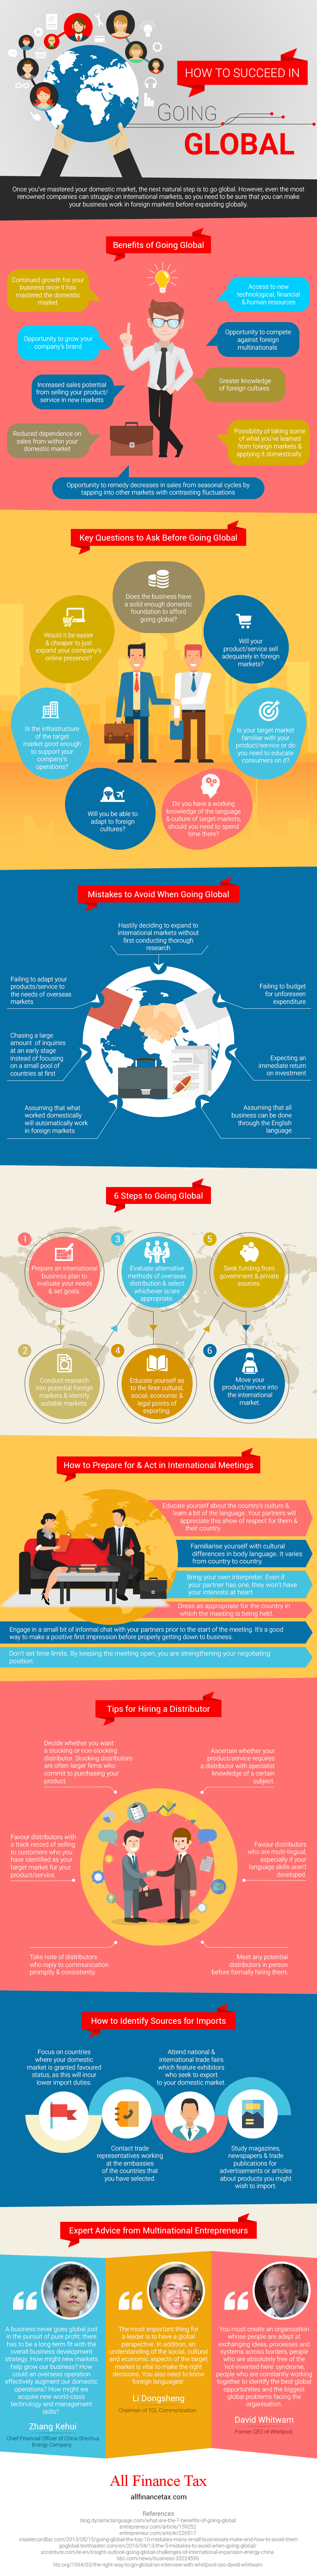 How to Succeed in Going Global - Infographic